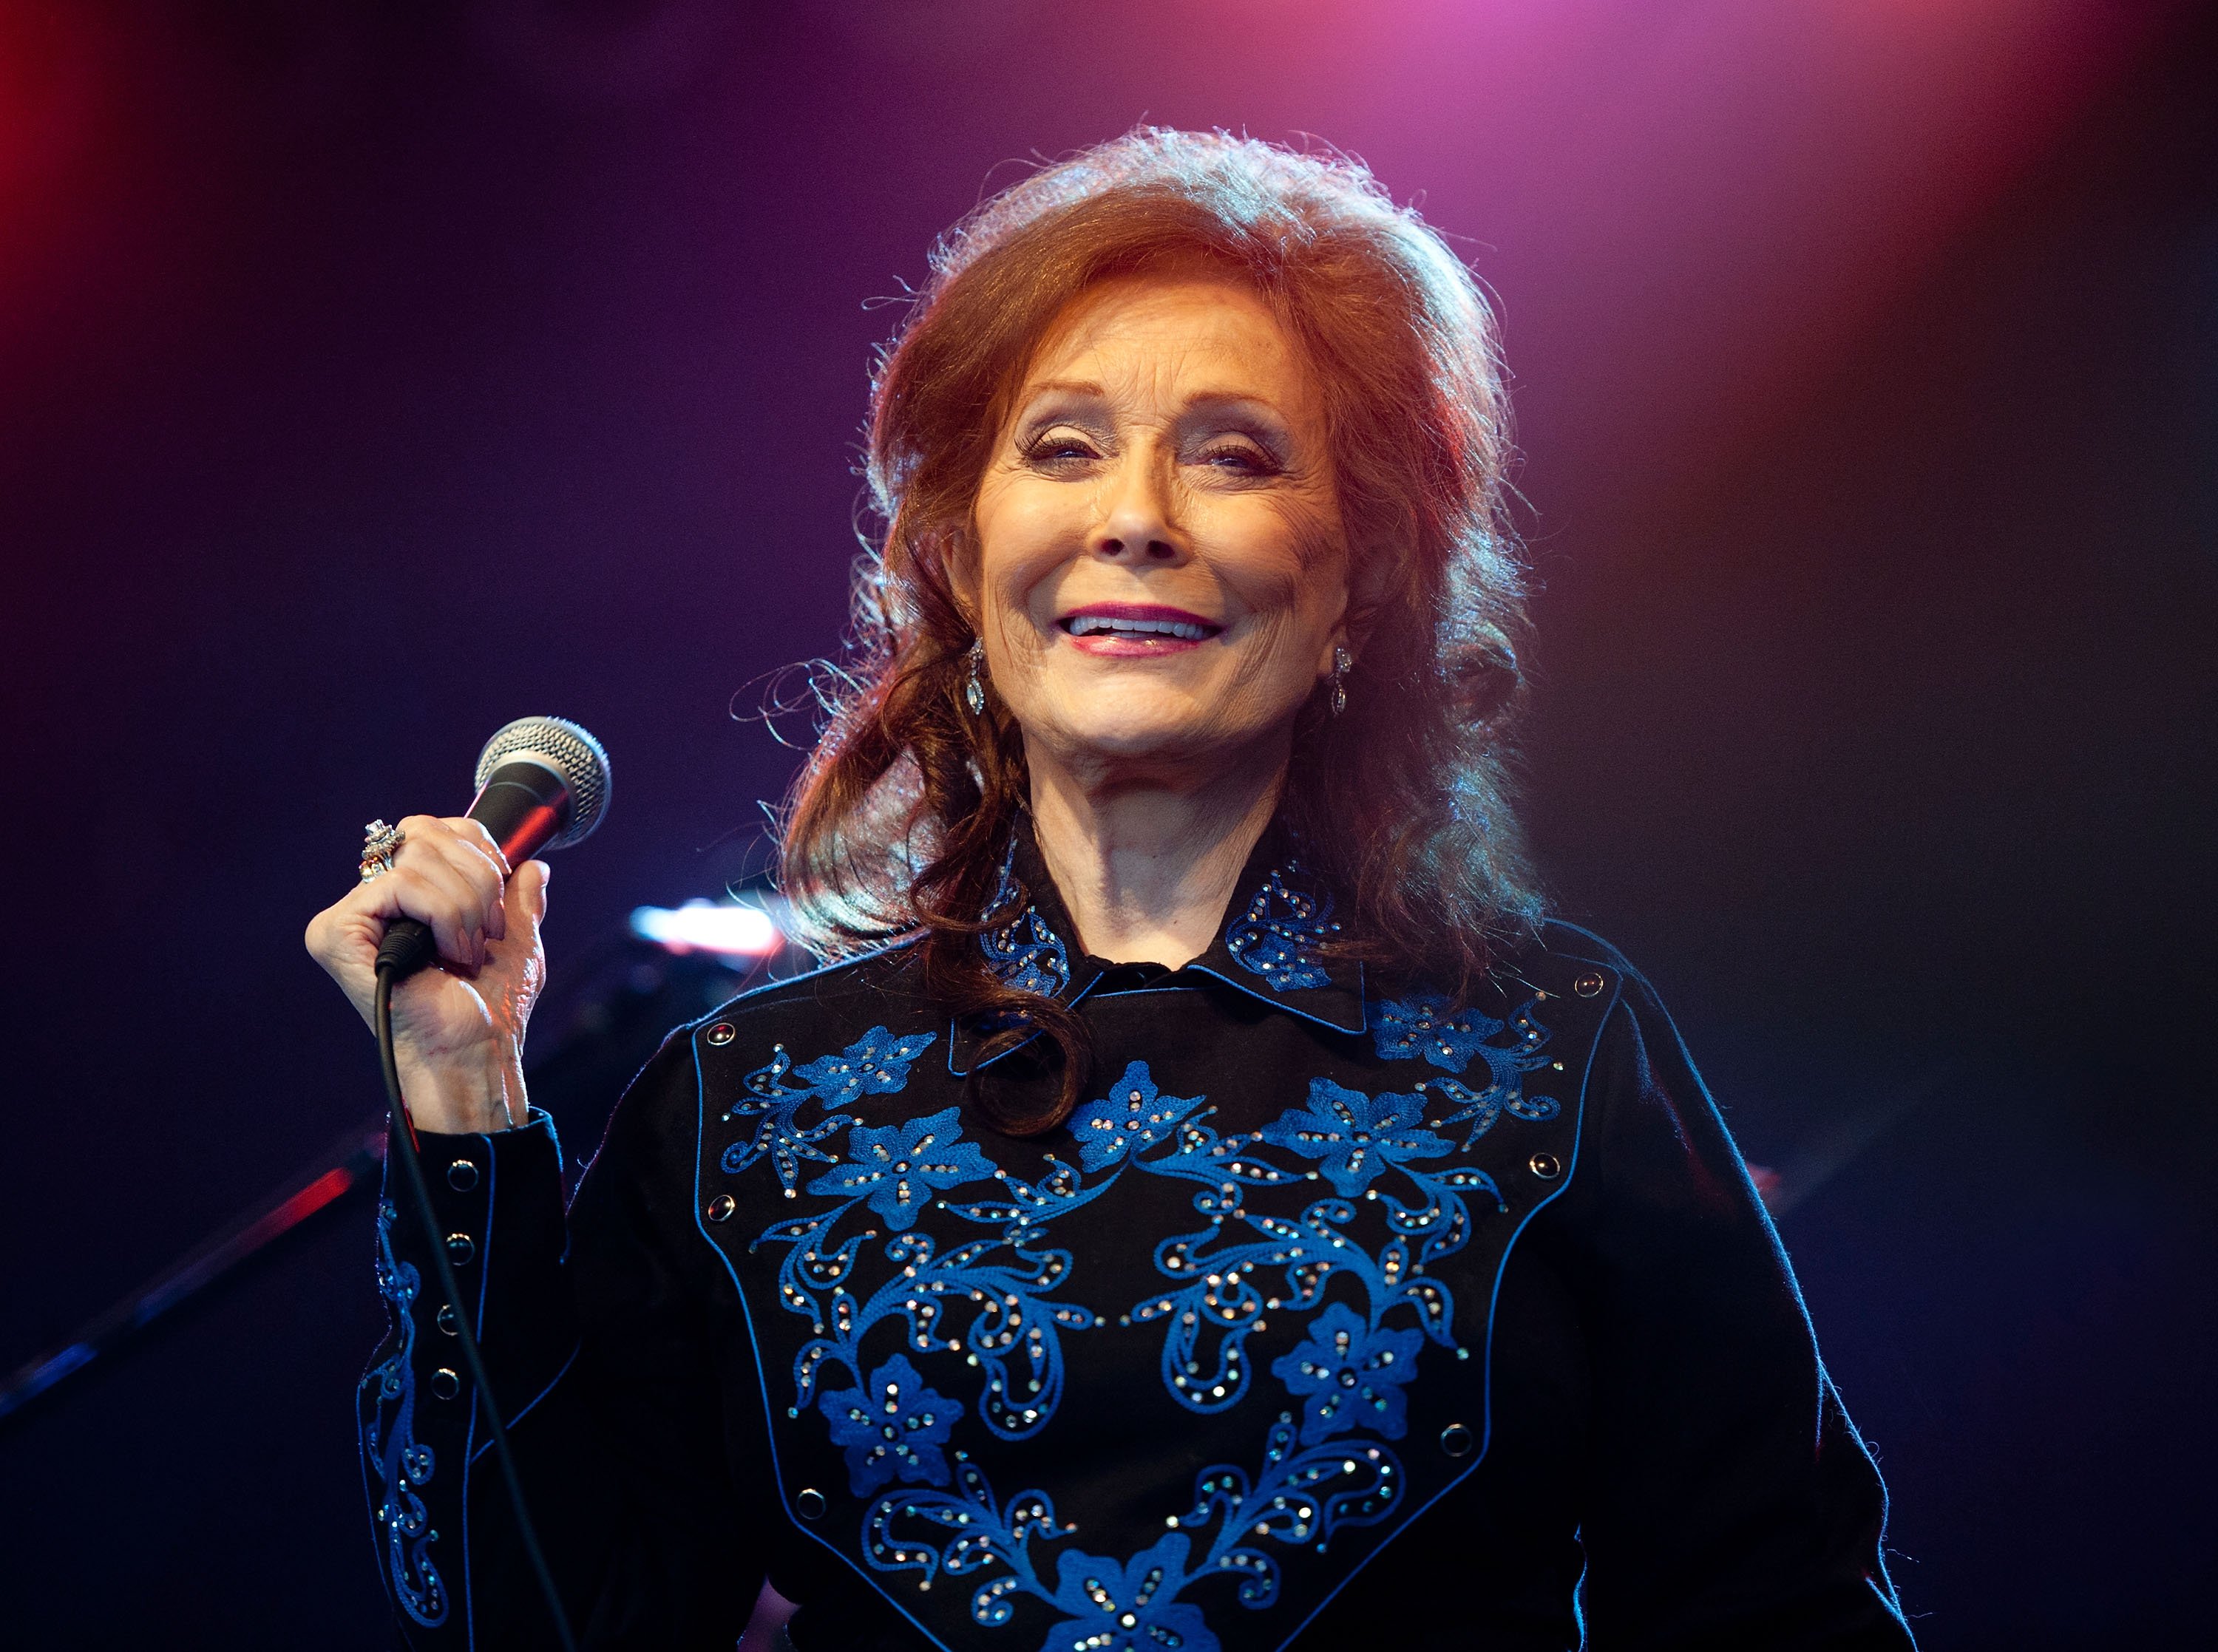 Loretta Lynn holds a microphone and smiles onstage